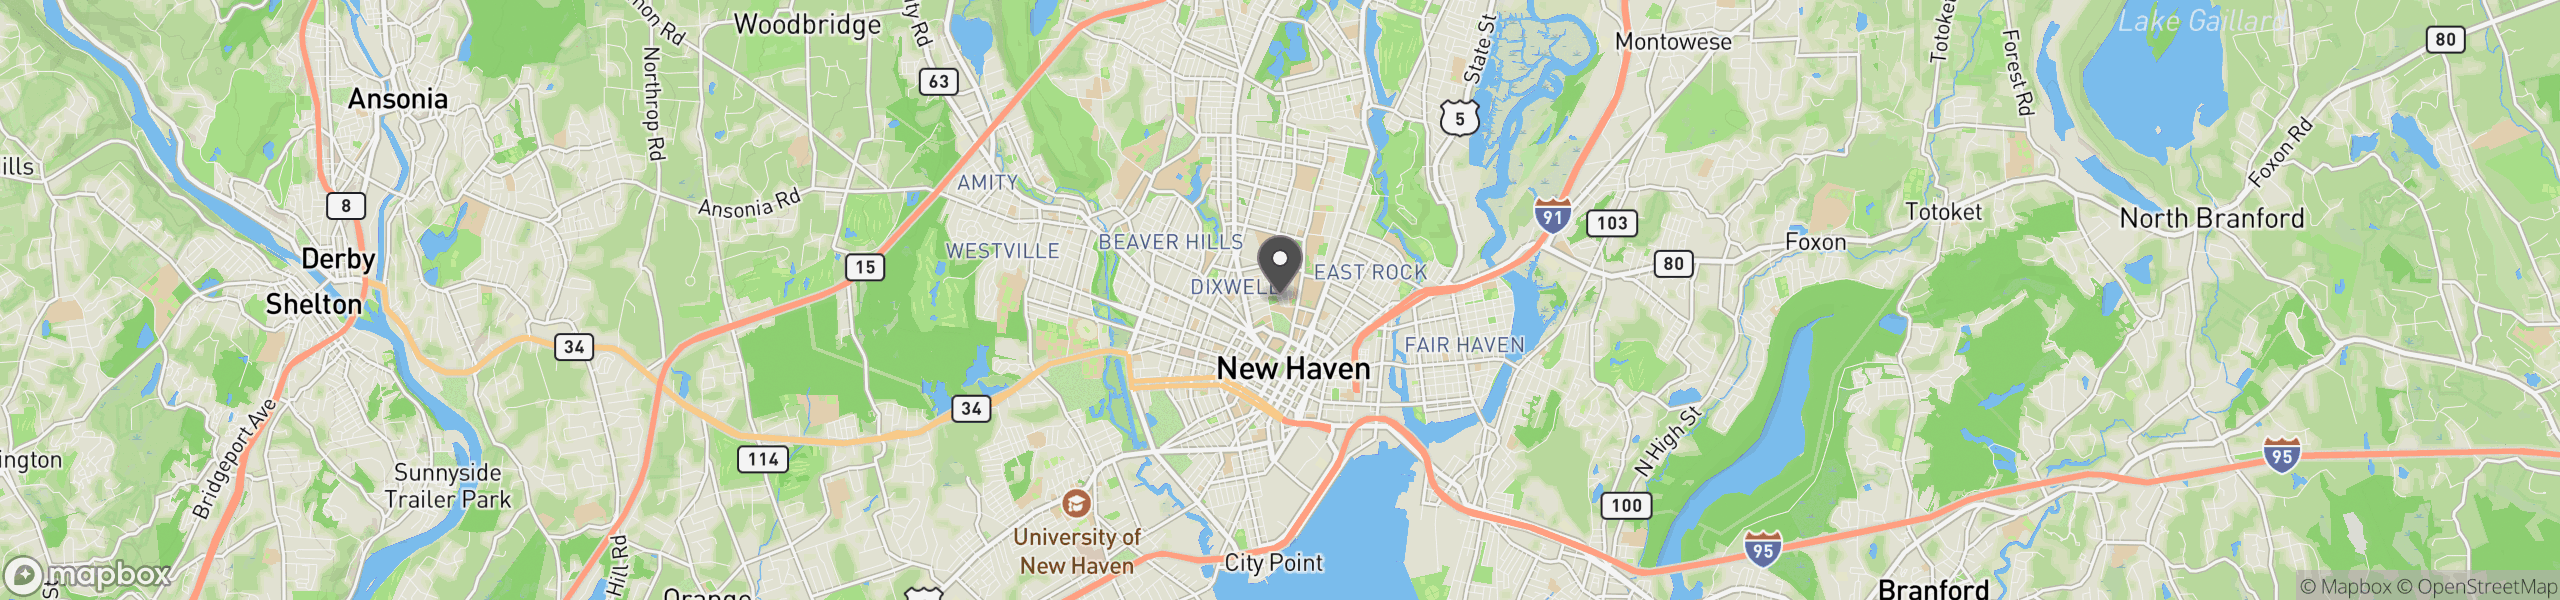 New Haven, CT 06511